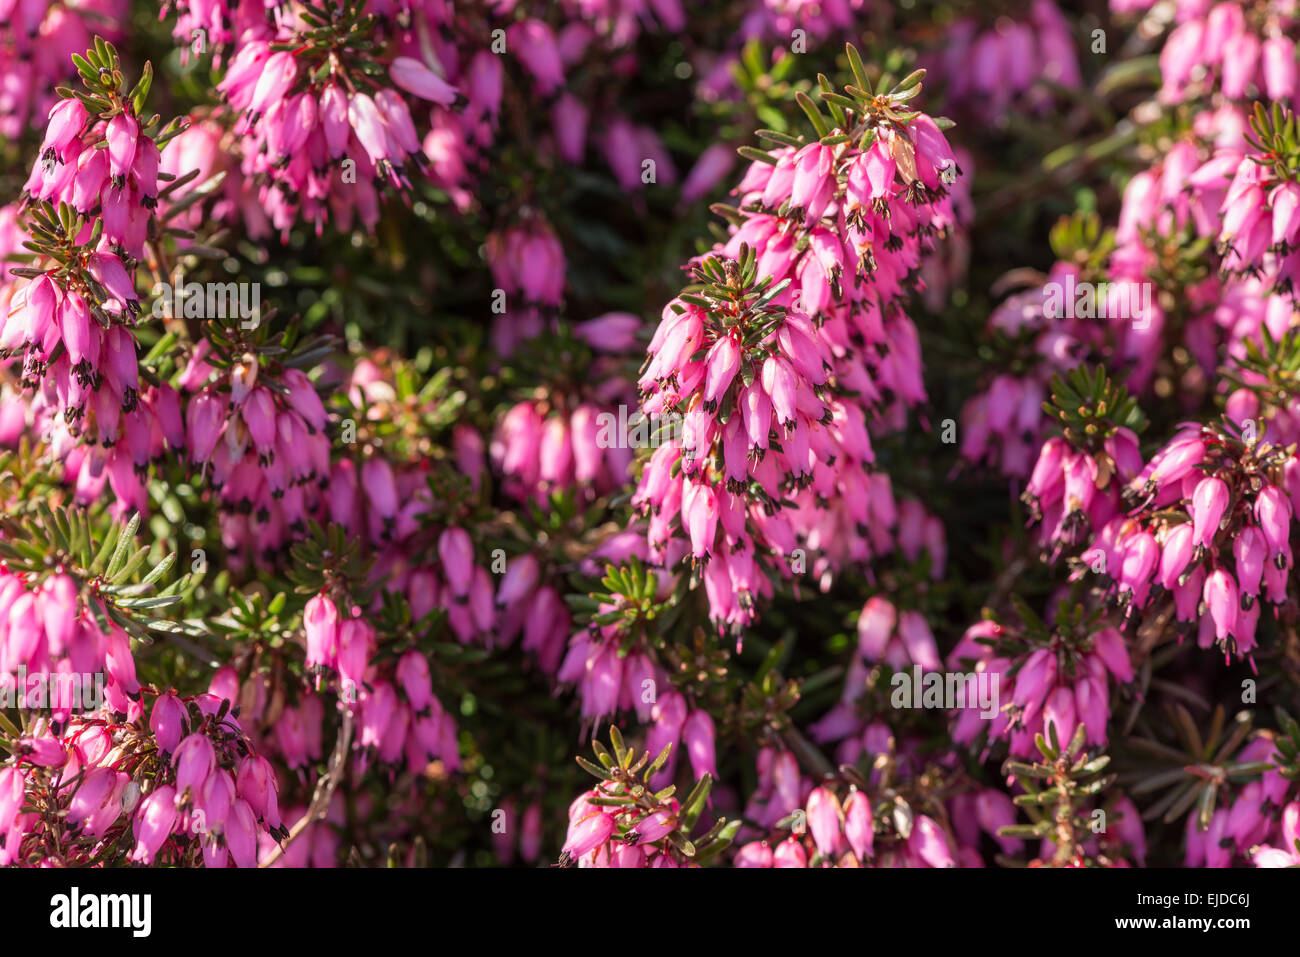 Erica cinerea pretty heather plant on chalk soil heath pale pink to mauve flowers delicate and bell shaped flowers Stock Photo